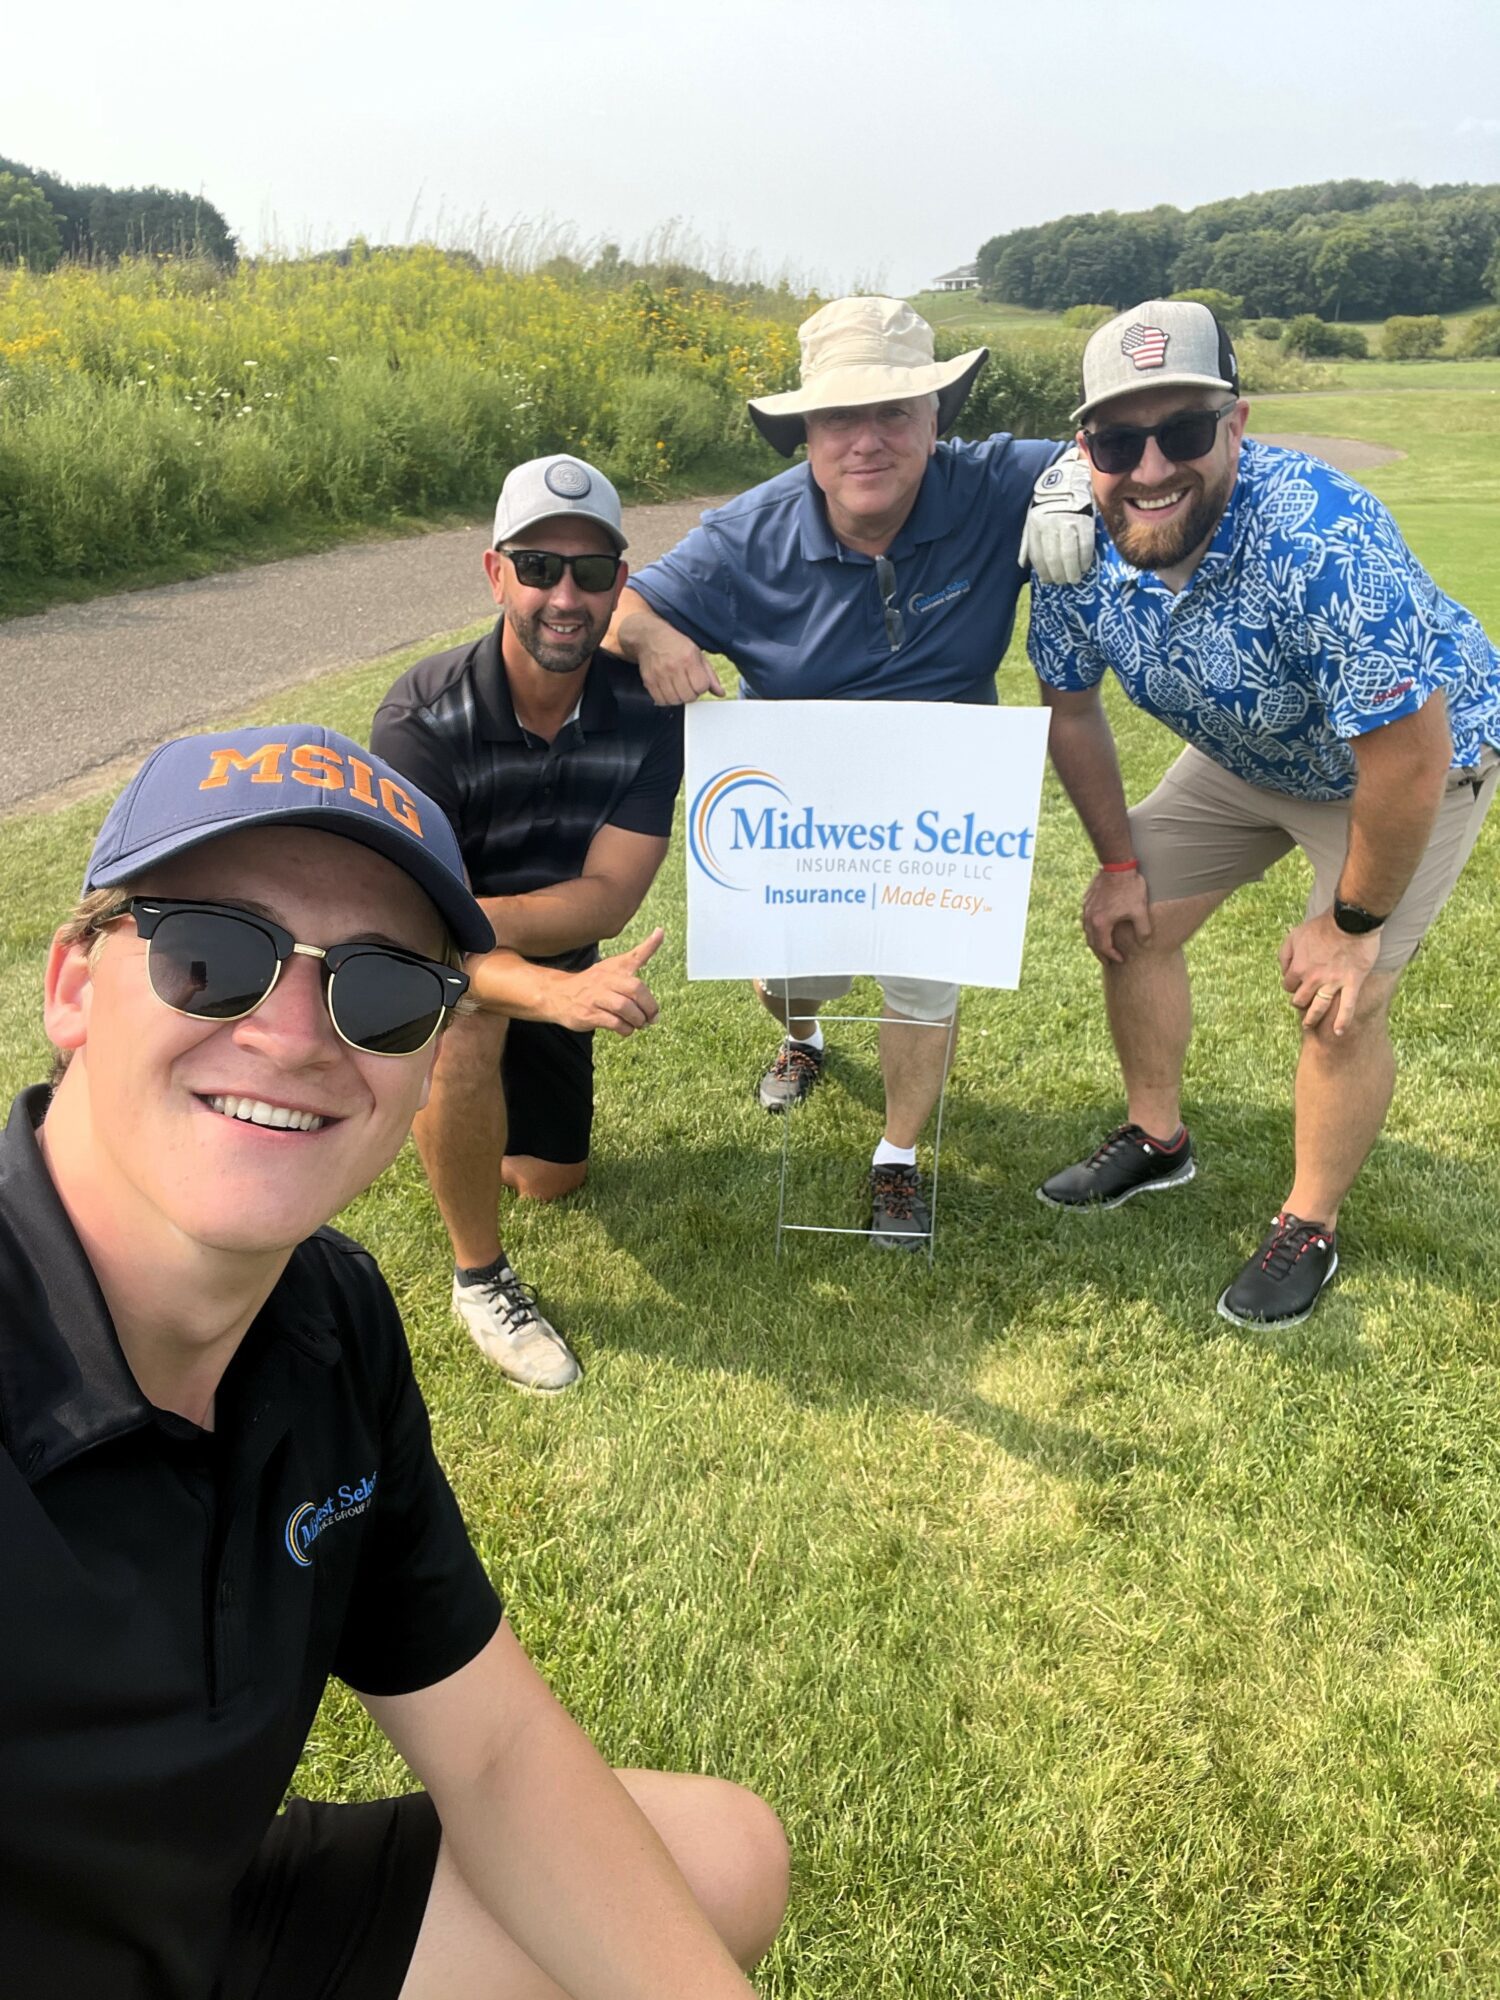 Midwest Select Insurance Group Insurance Agents Brendan Dooley, Jason Phillips, Mario Racanelli, and Curtis Deprey in front of MSIG sponsorship sign.